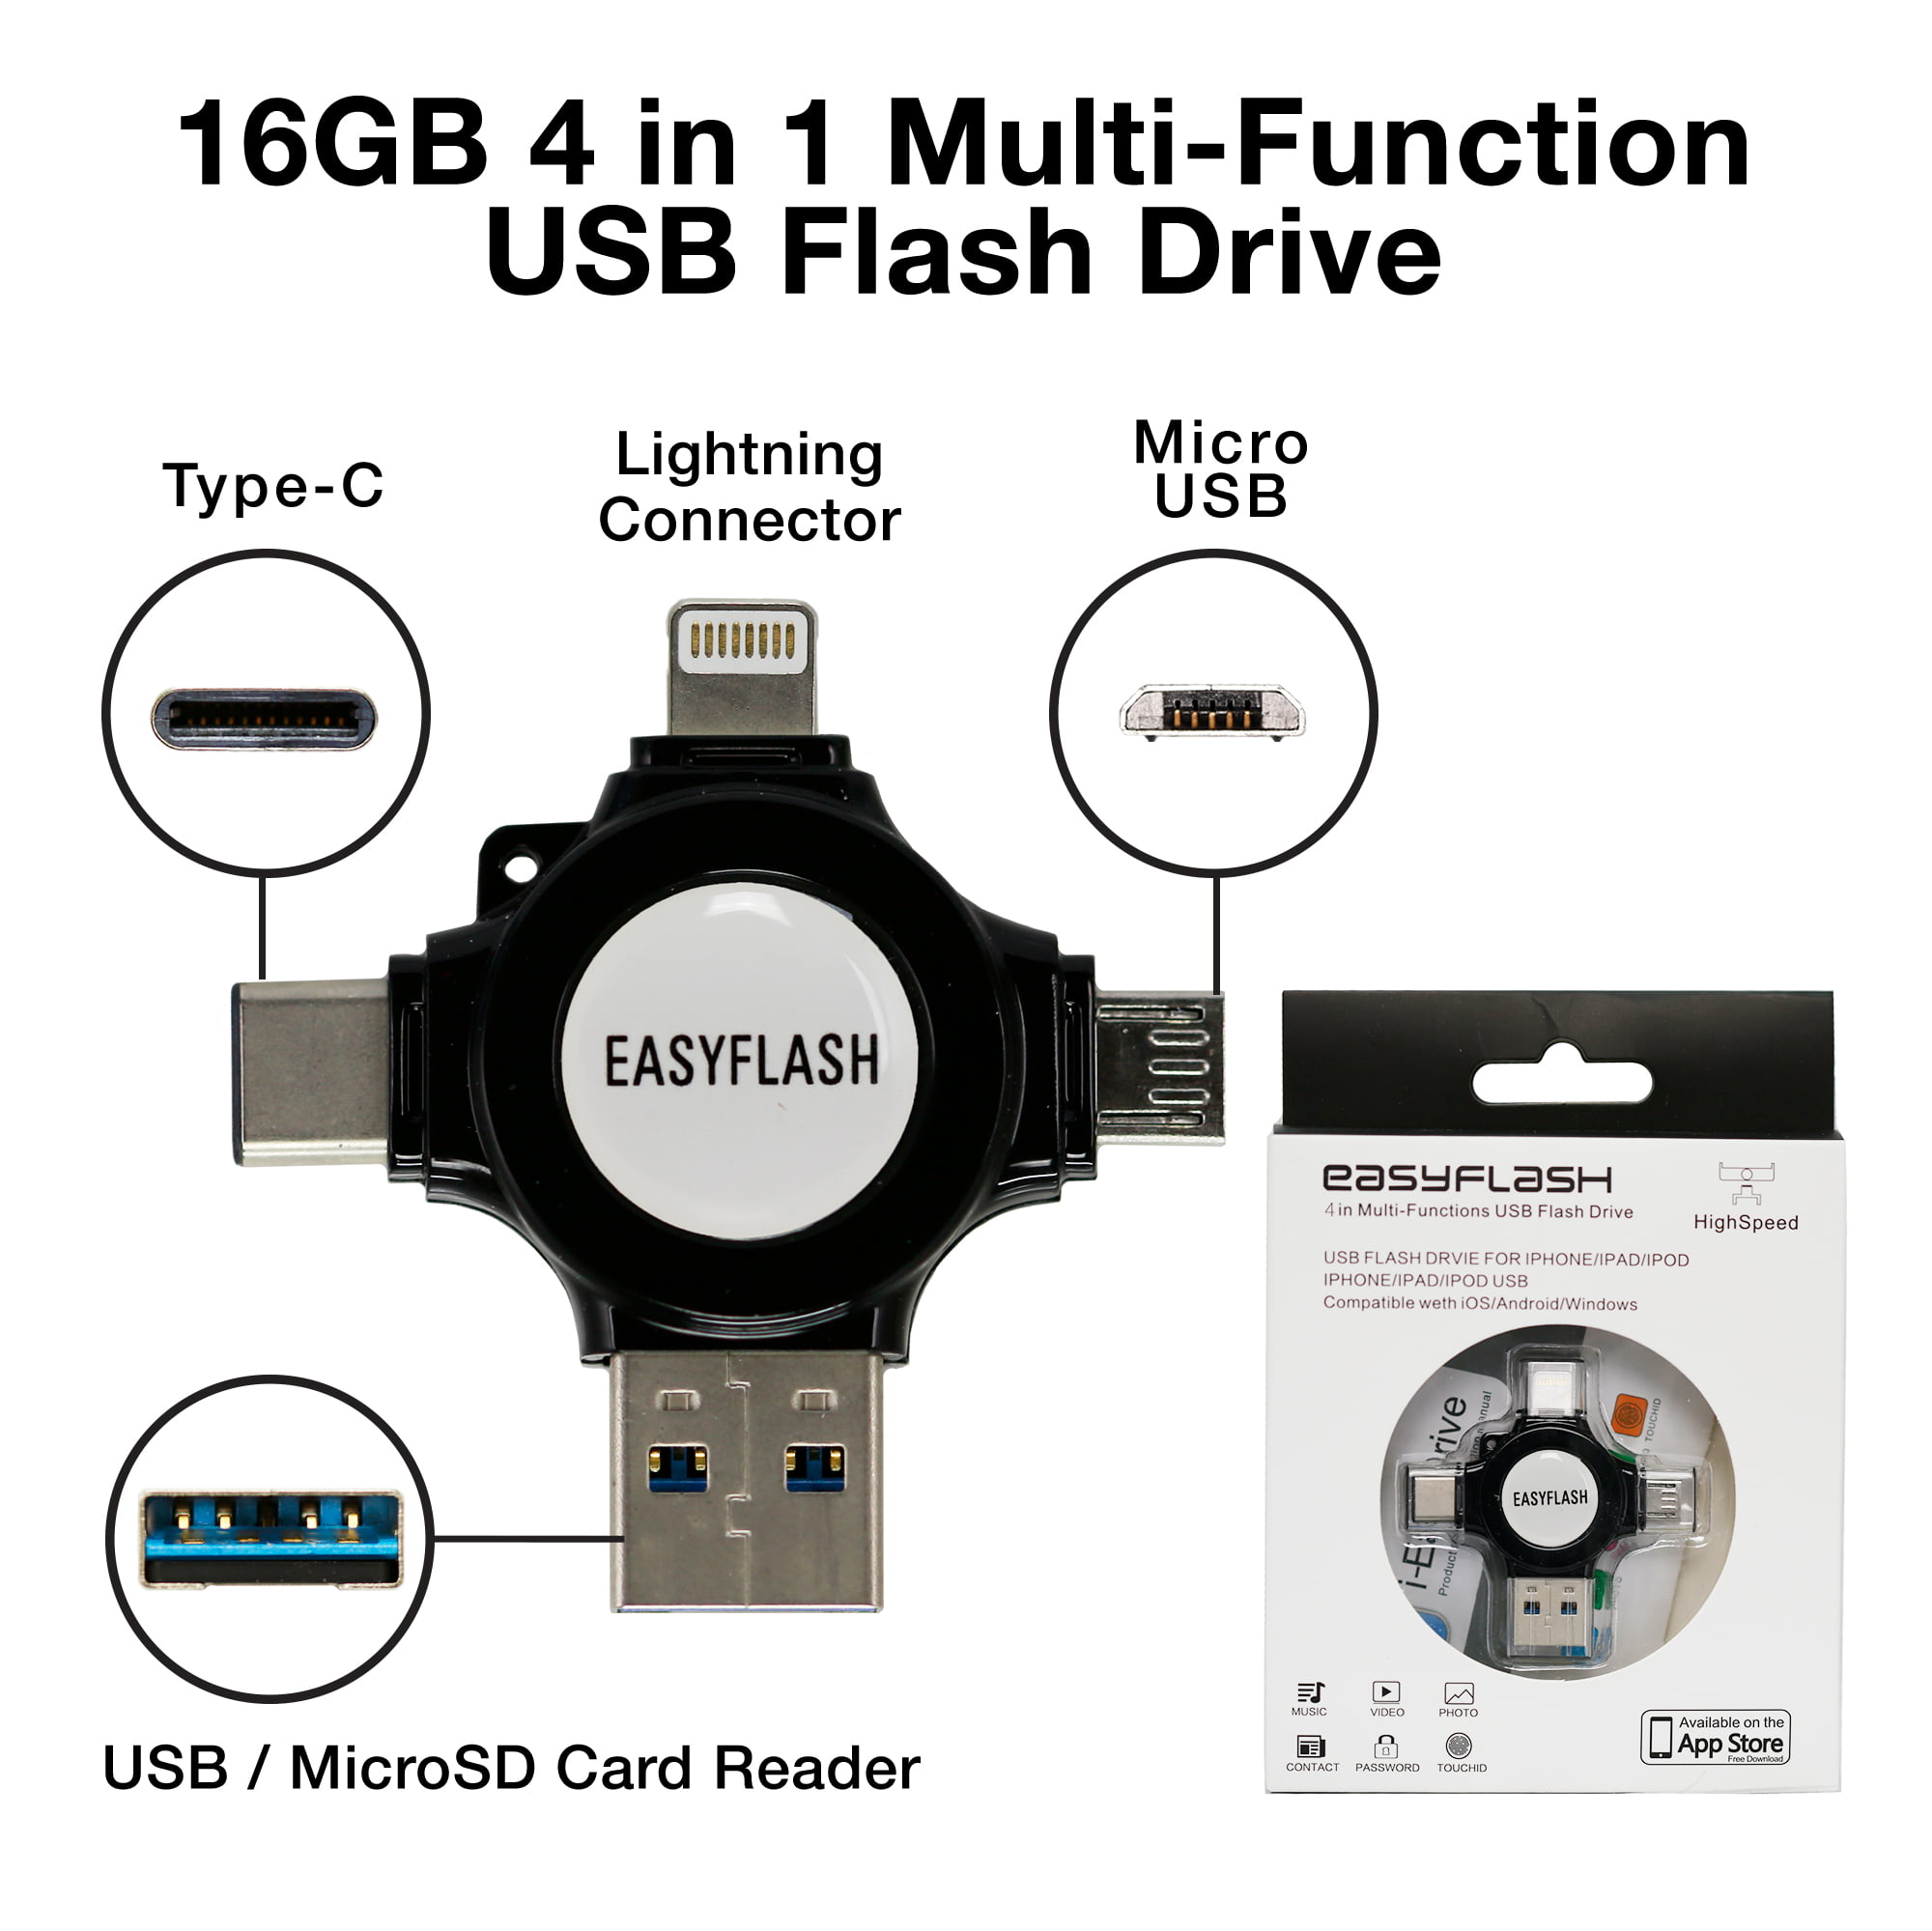 External Storage Expansion Flash Drive 4 In 1 for iPhone iPad Android Phone and Computer 16GB